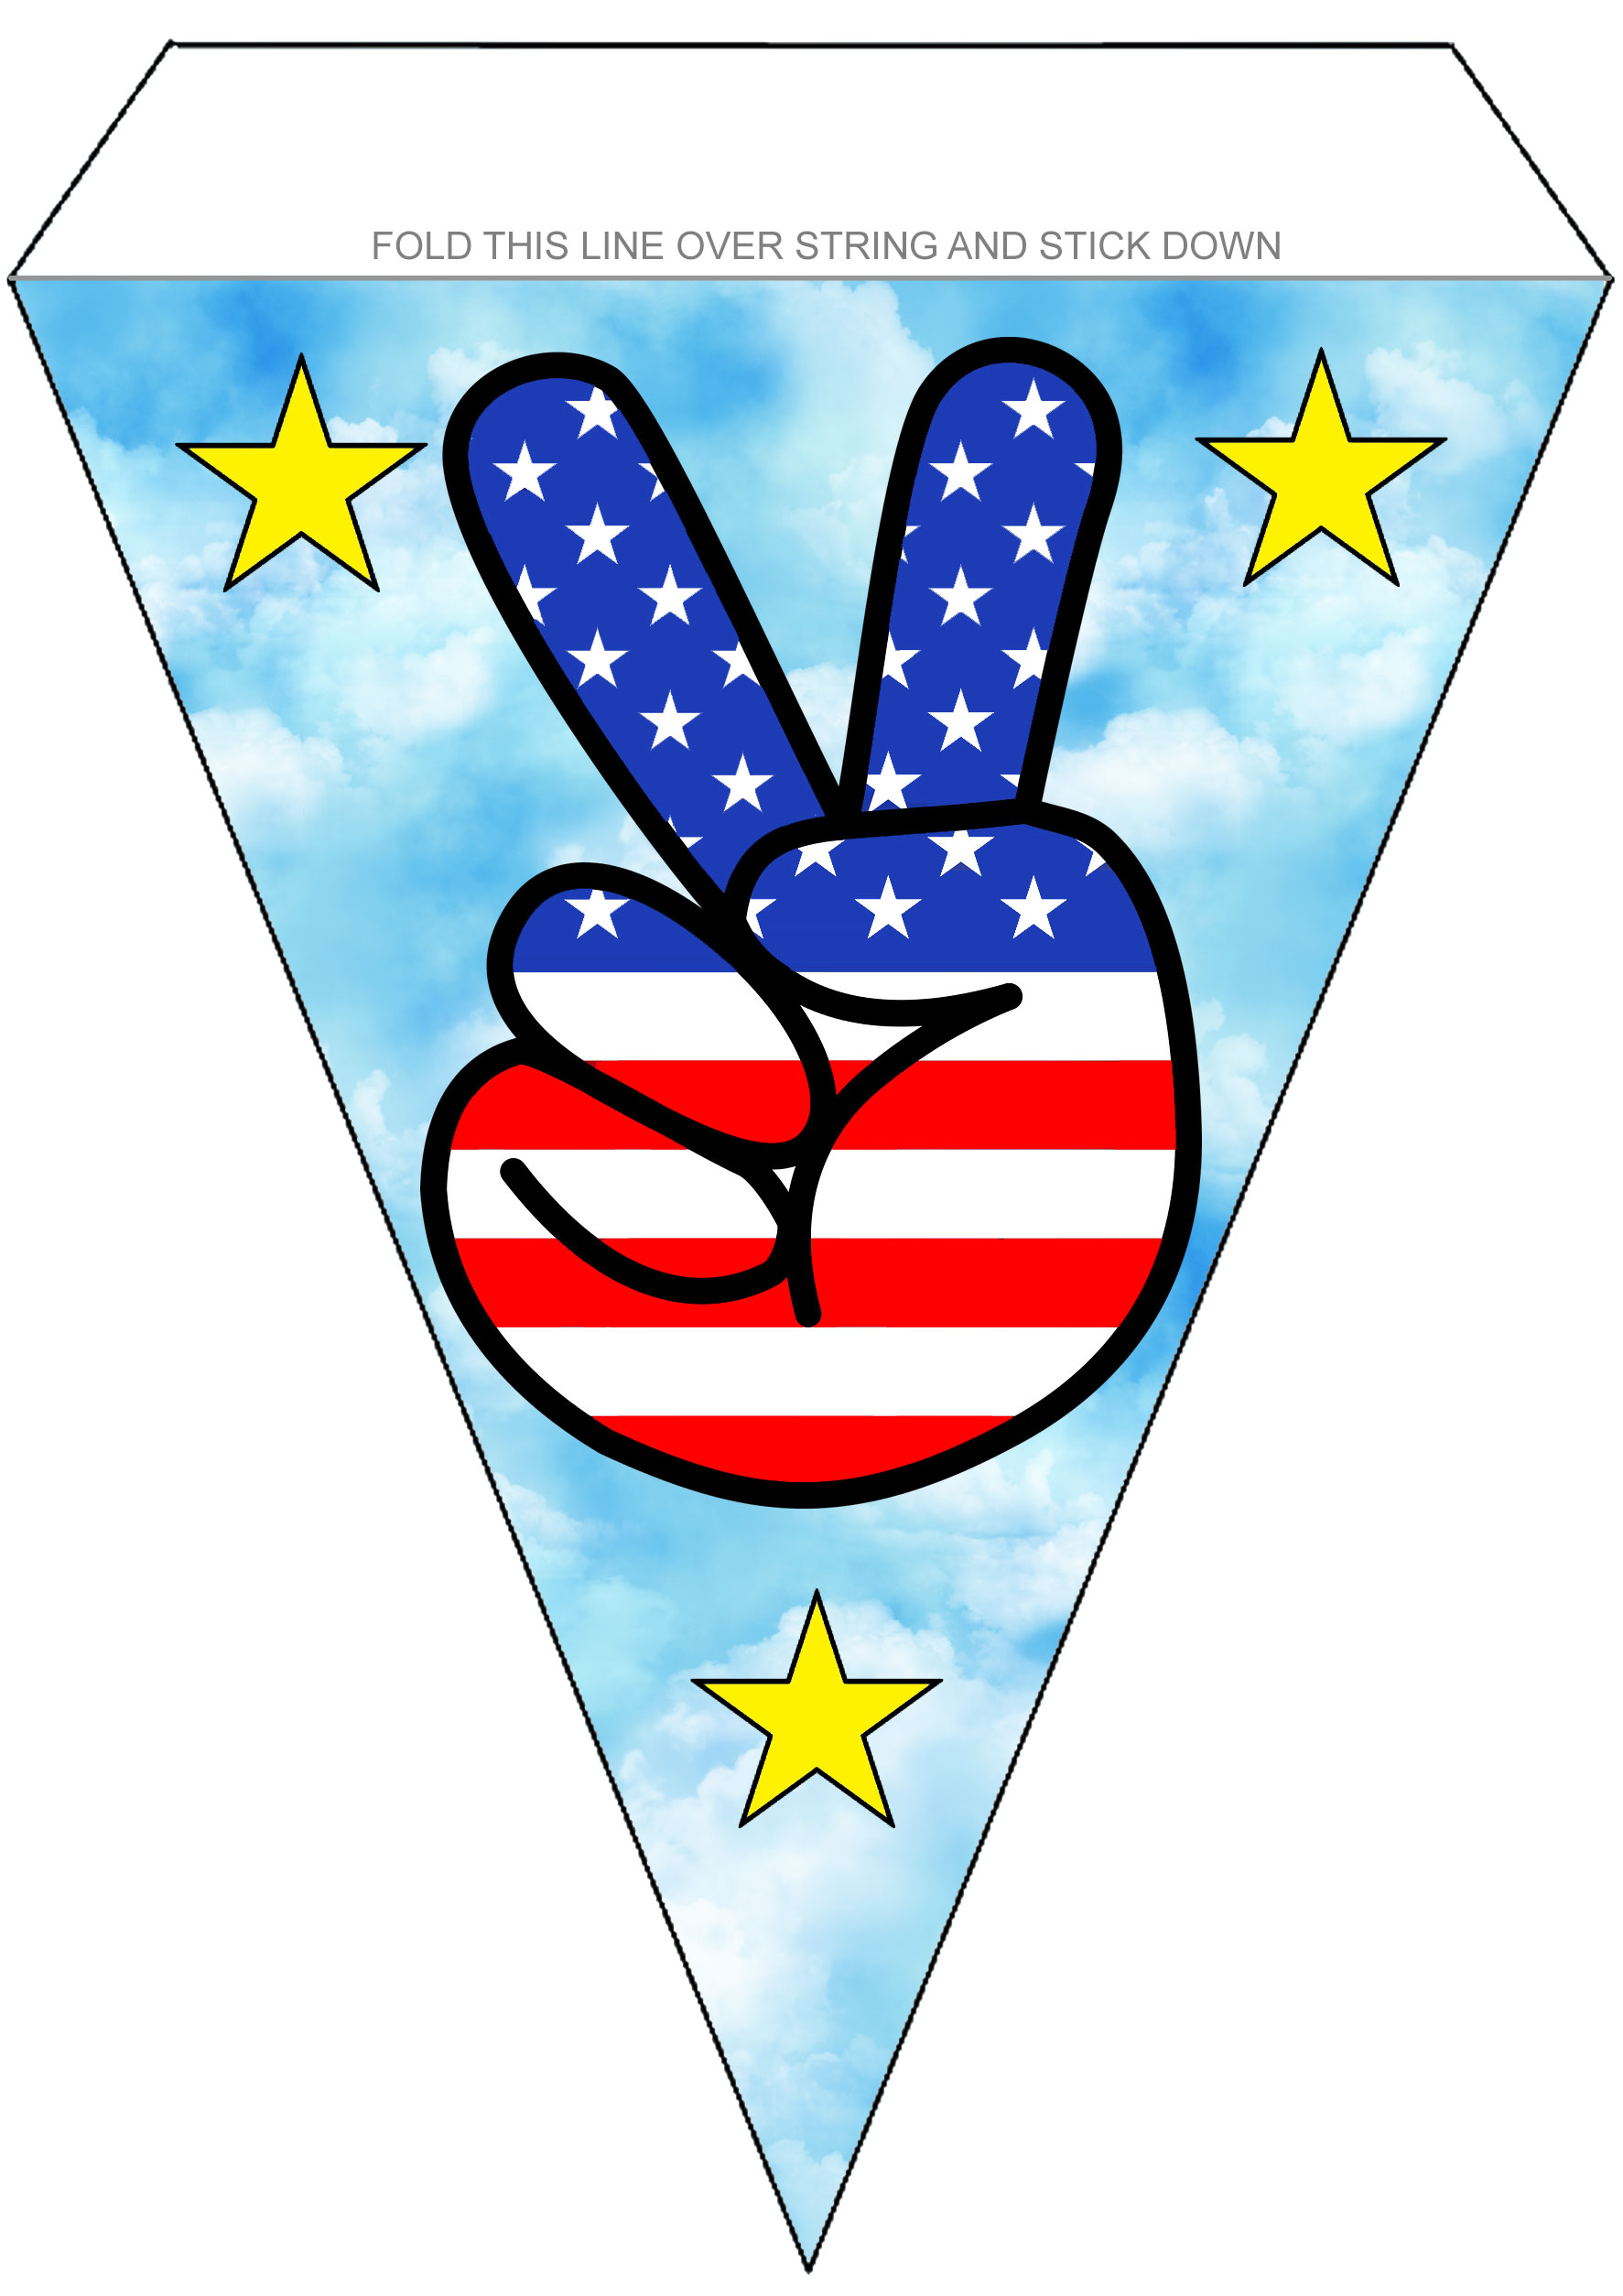 Bunting to print for American celebrations, pictures a peace sign with USA flag design